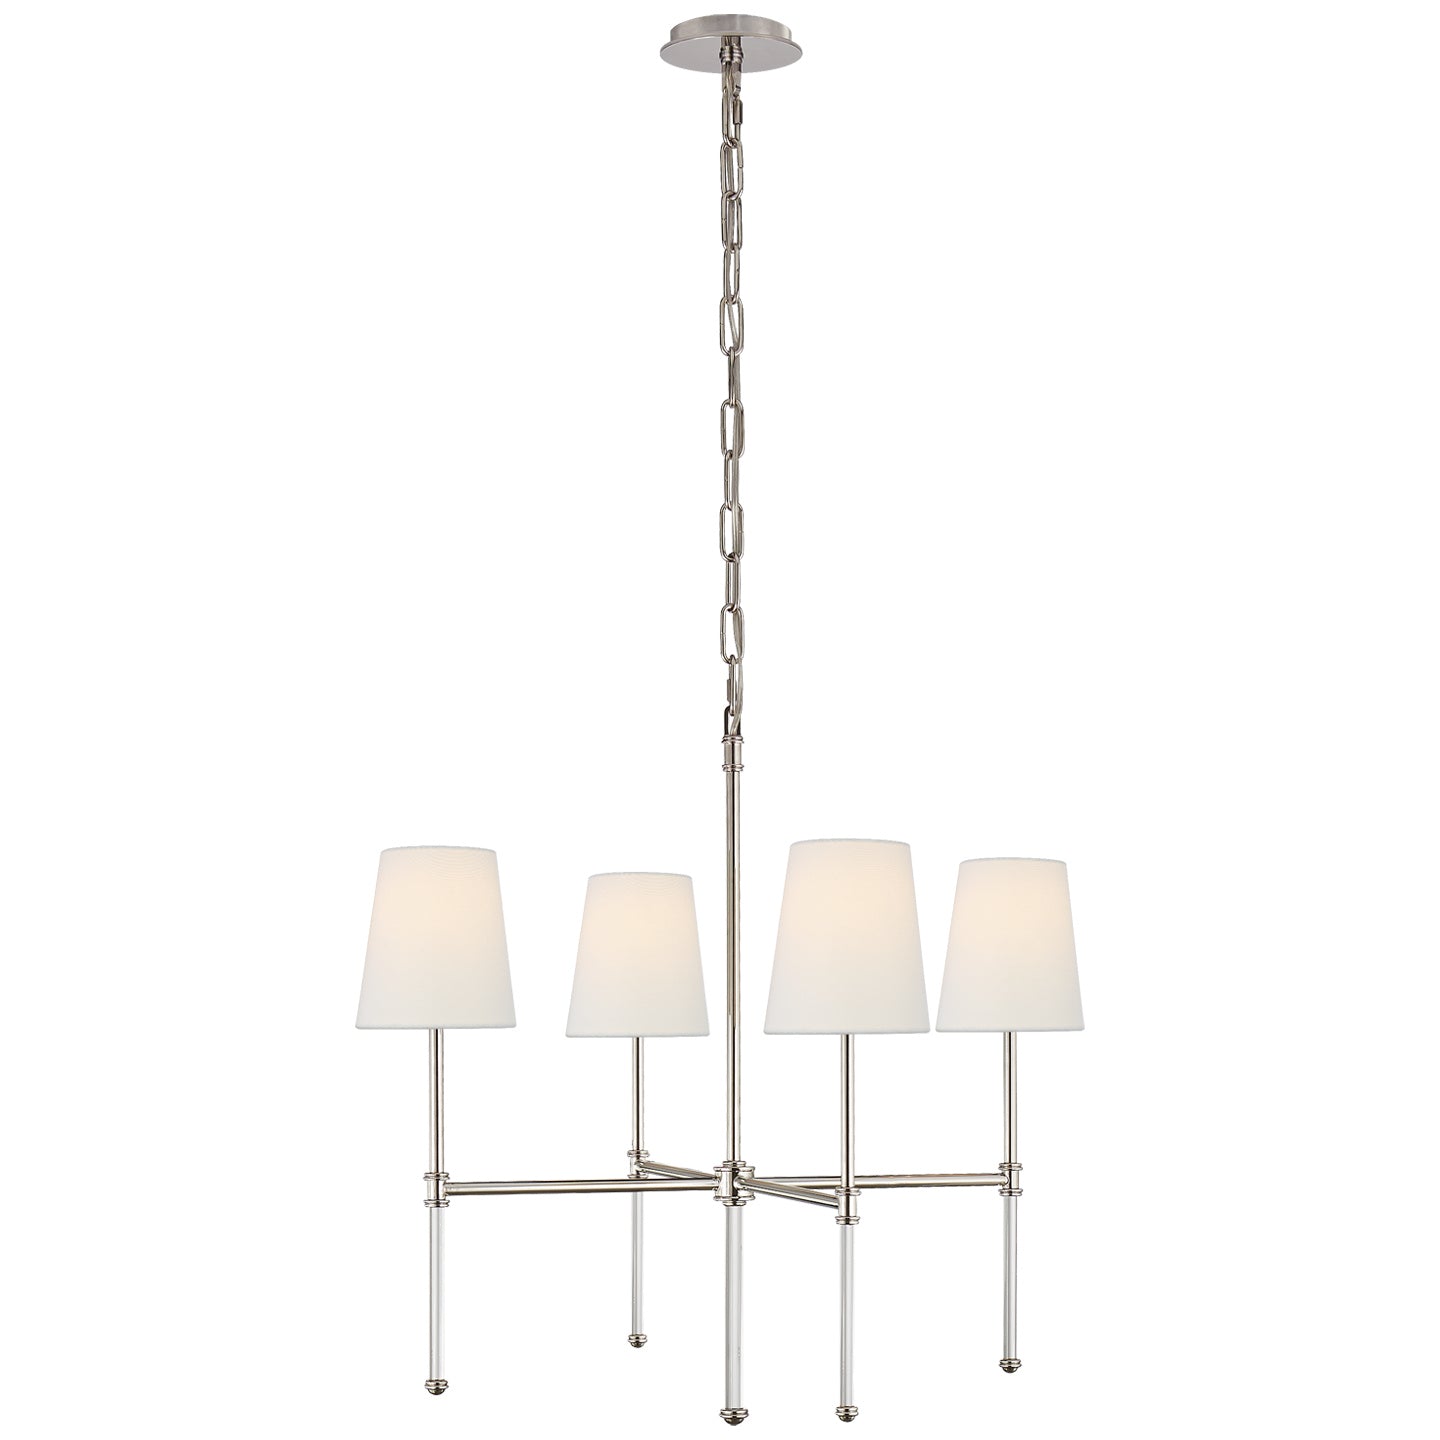 Load image into Gallery viewer, Visual Comfort Signature - SK 5050PN-L - Four Light Chandelier - Camille - Polished Nickel
